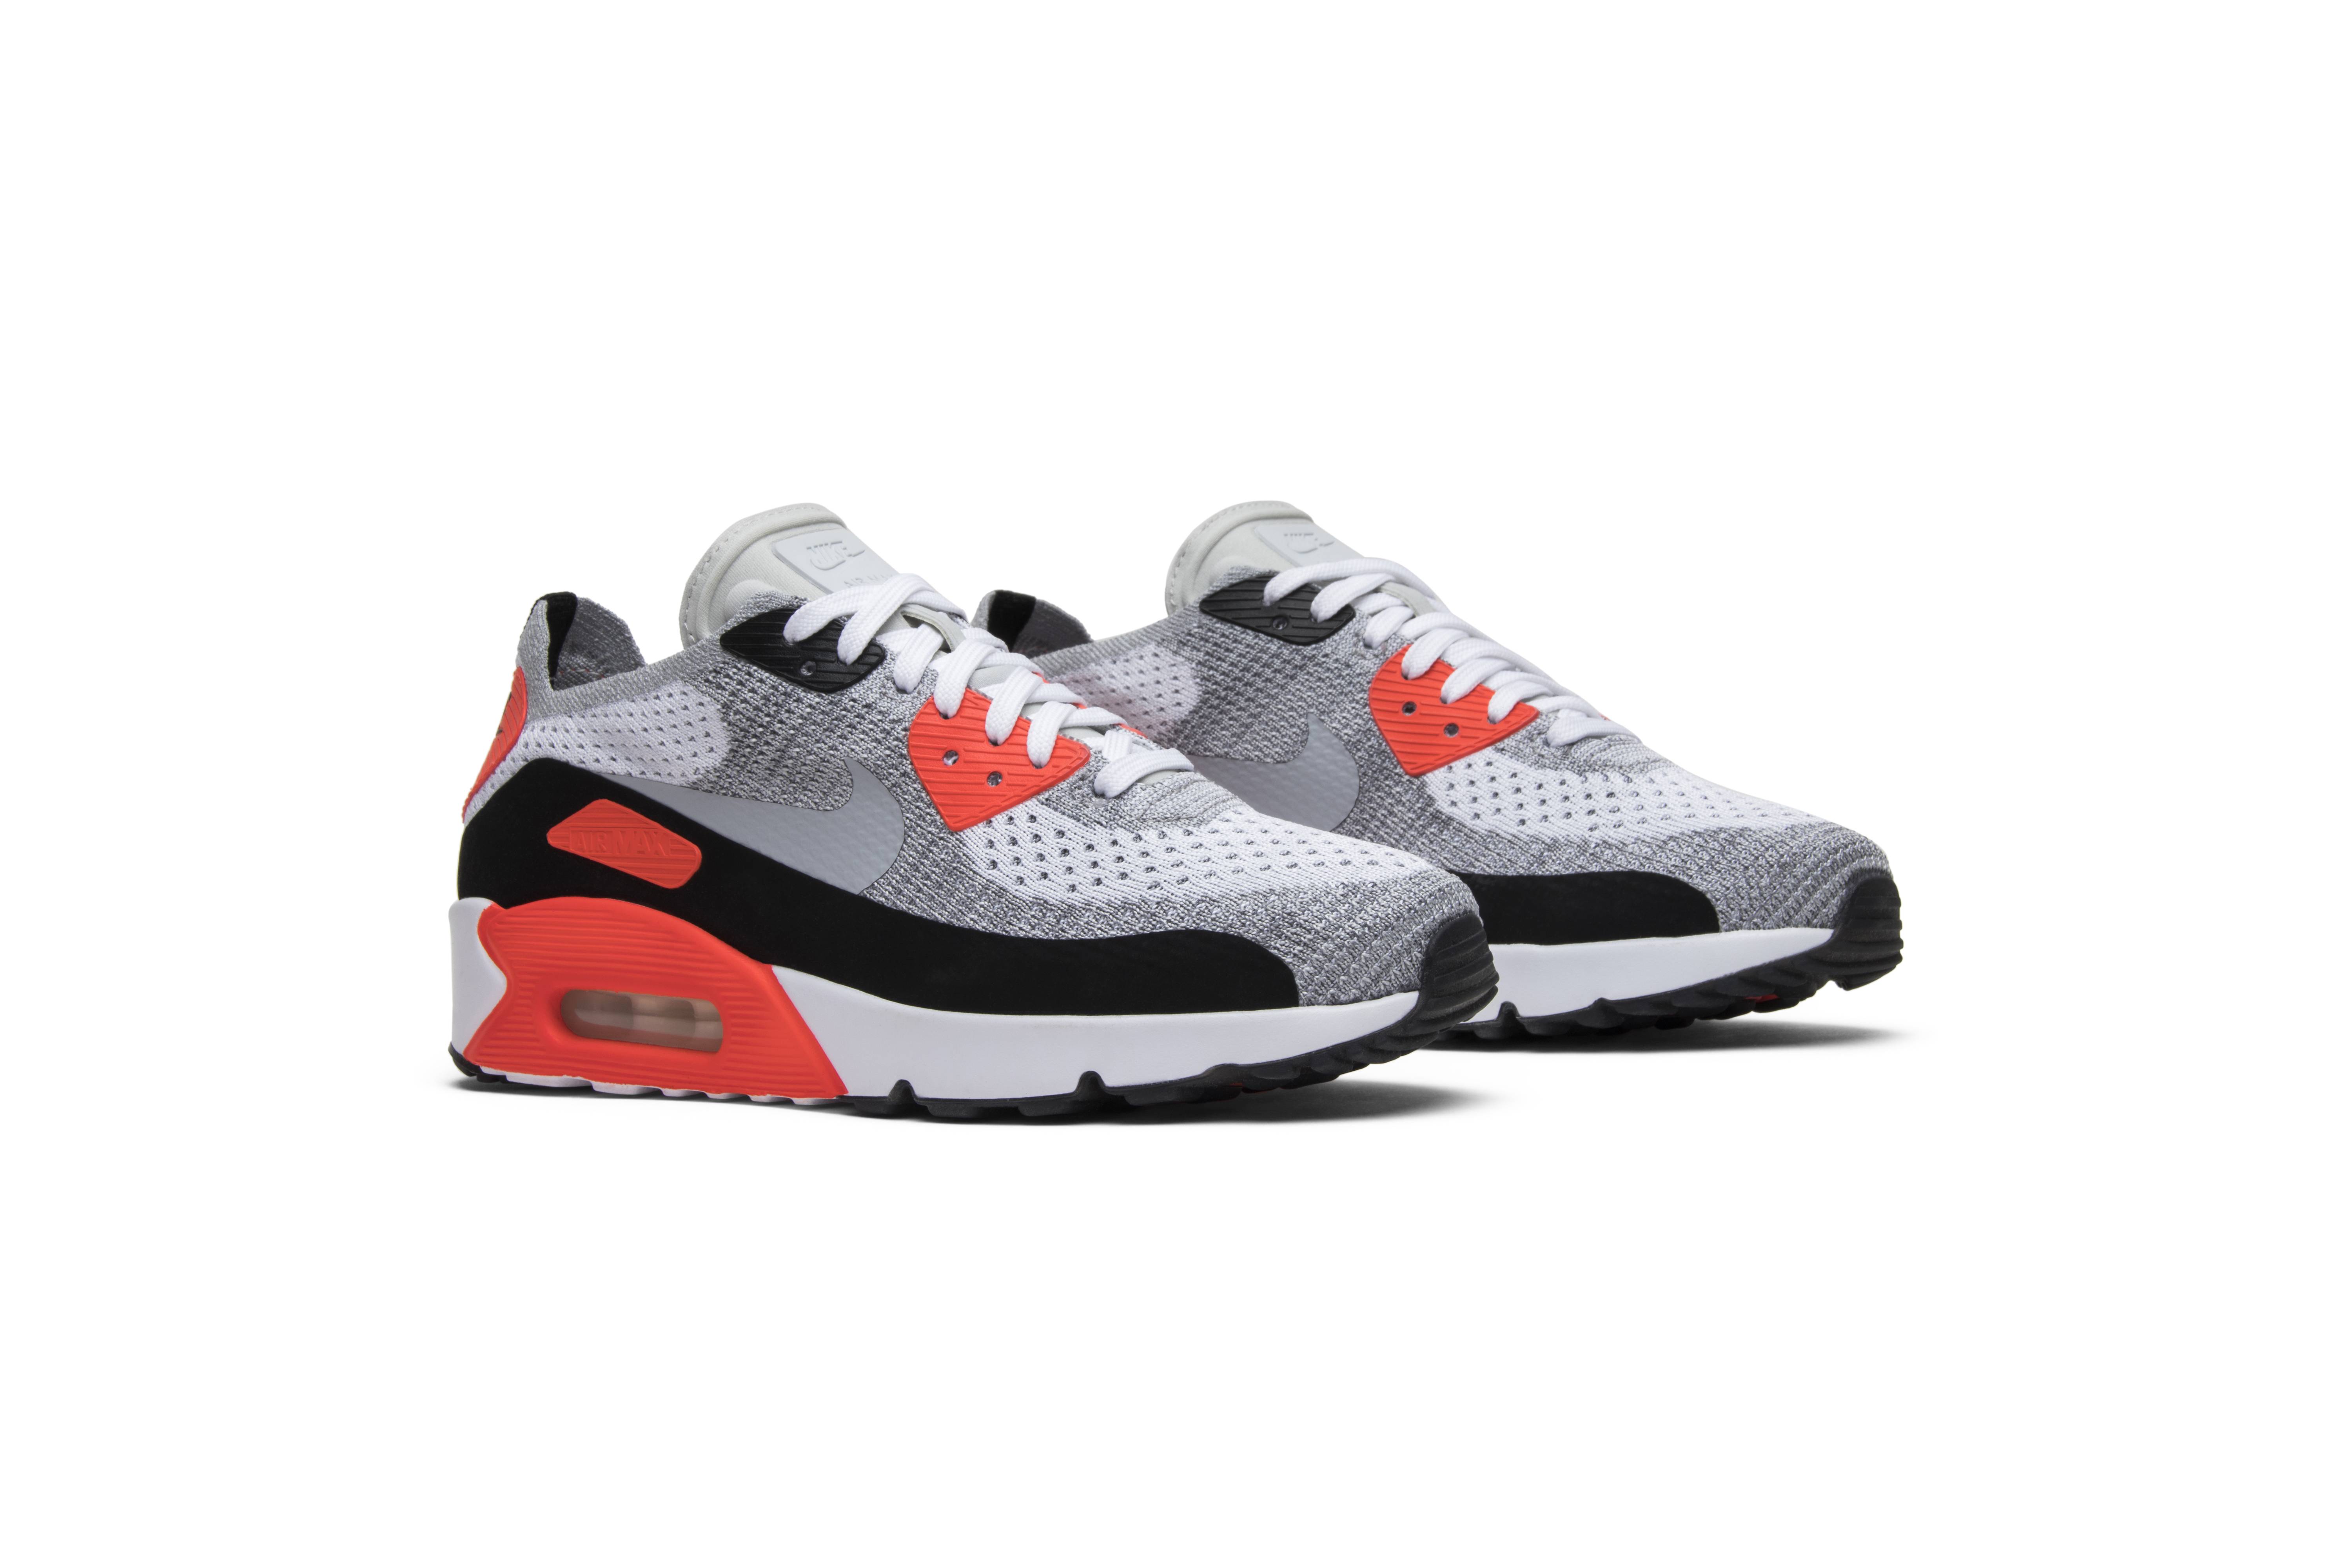 air max 90 ultra flyknit 2.0 infrared